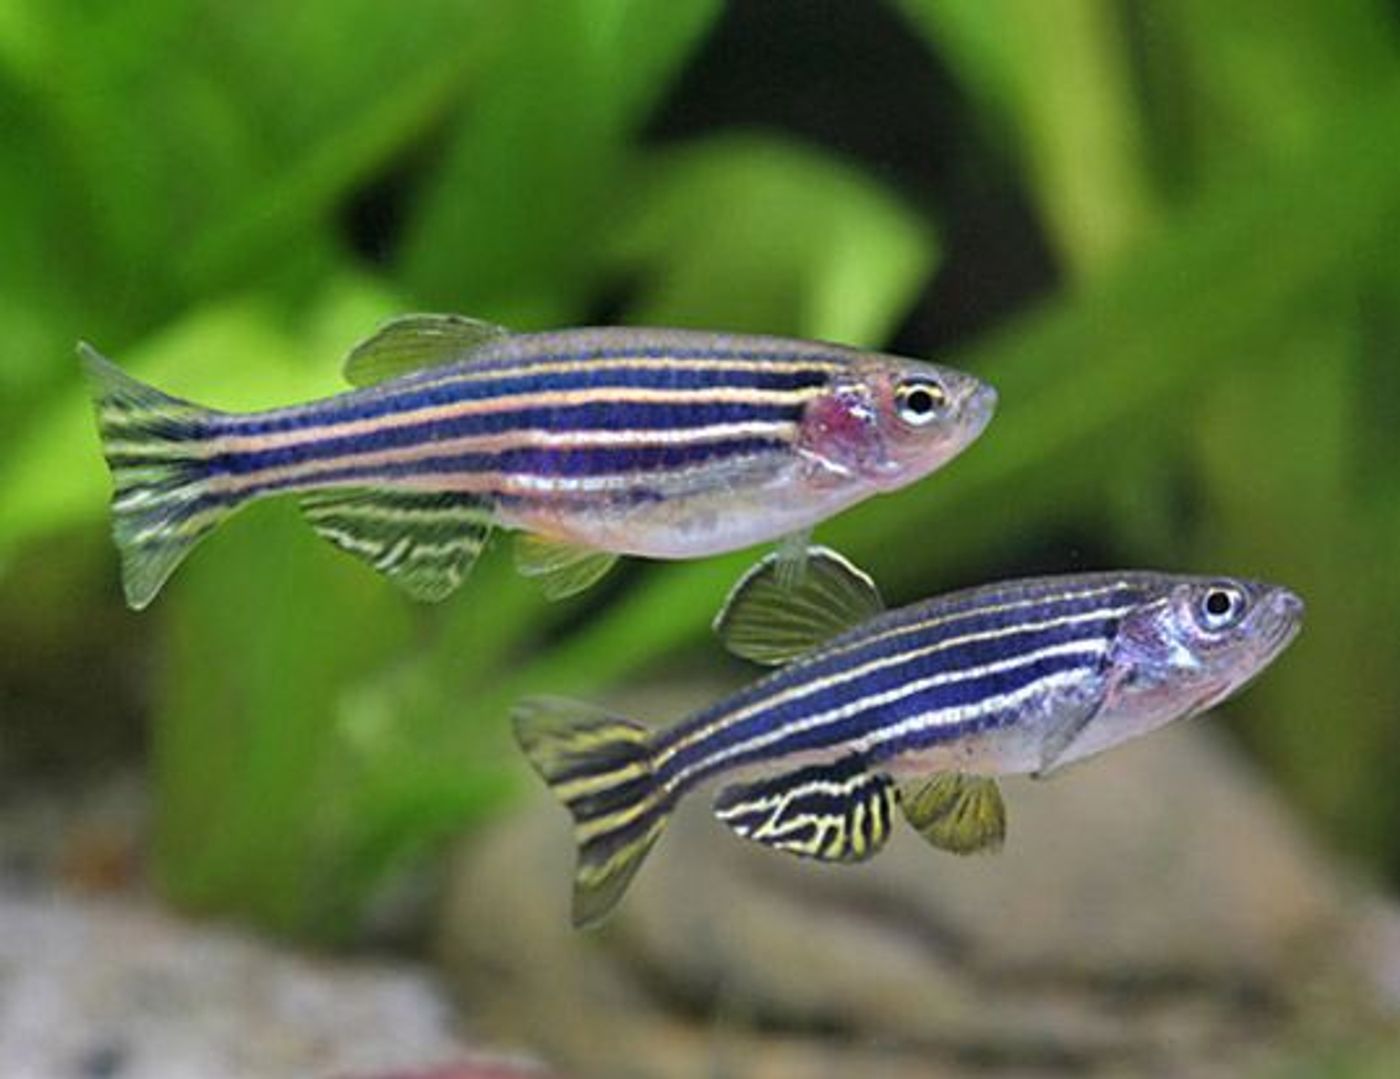 Researchers used zebra fish to learn more about MDR efflux pumps. Photo: World Life Expectancy